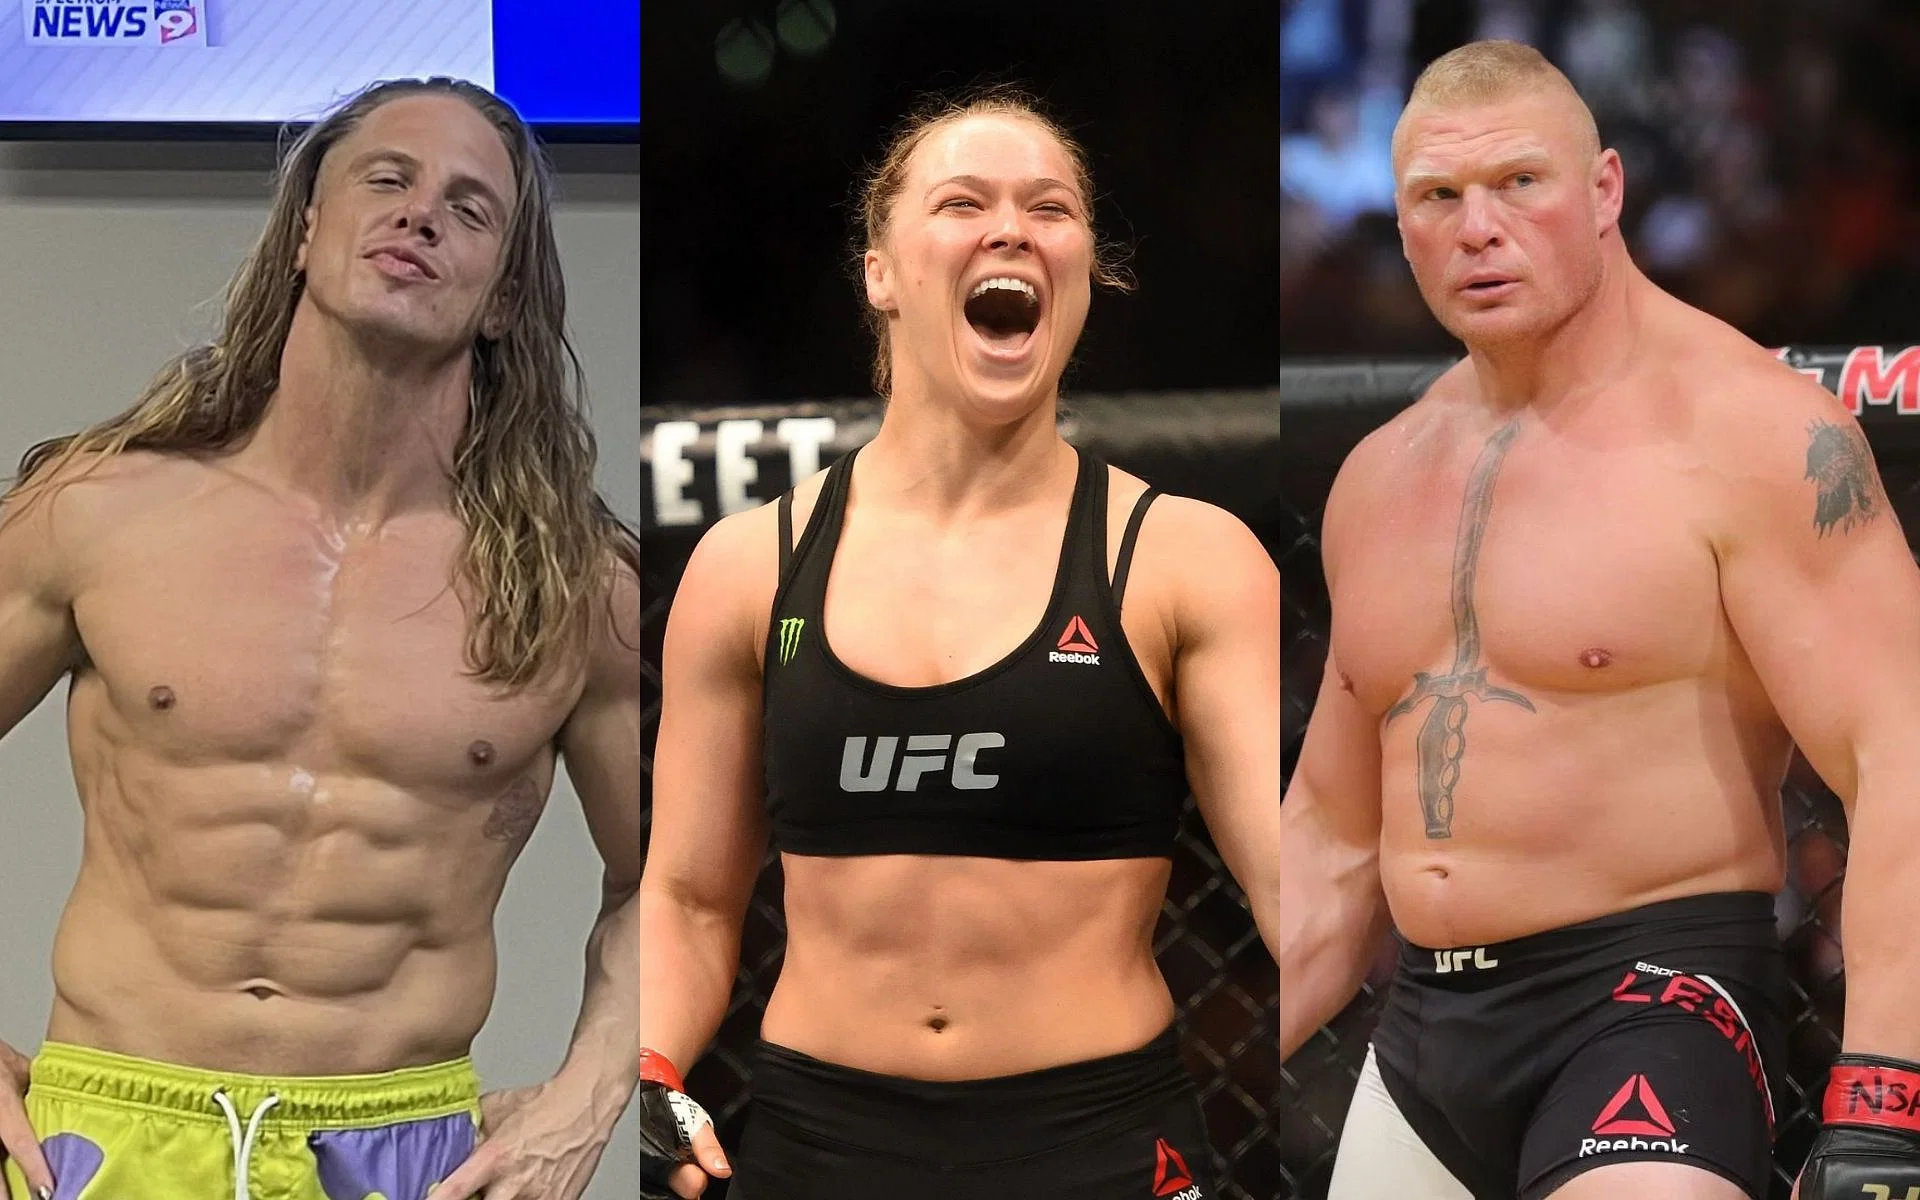 WWE and UFC: Forging New Frontiers at the APEX